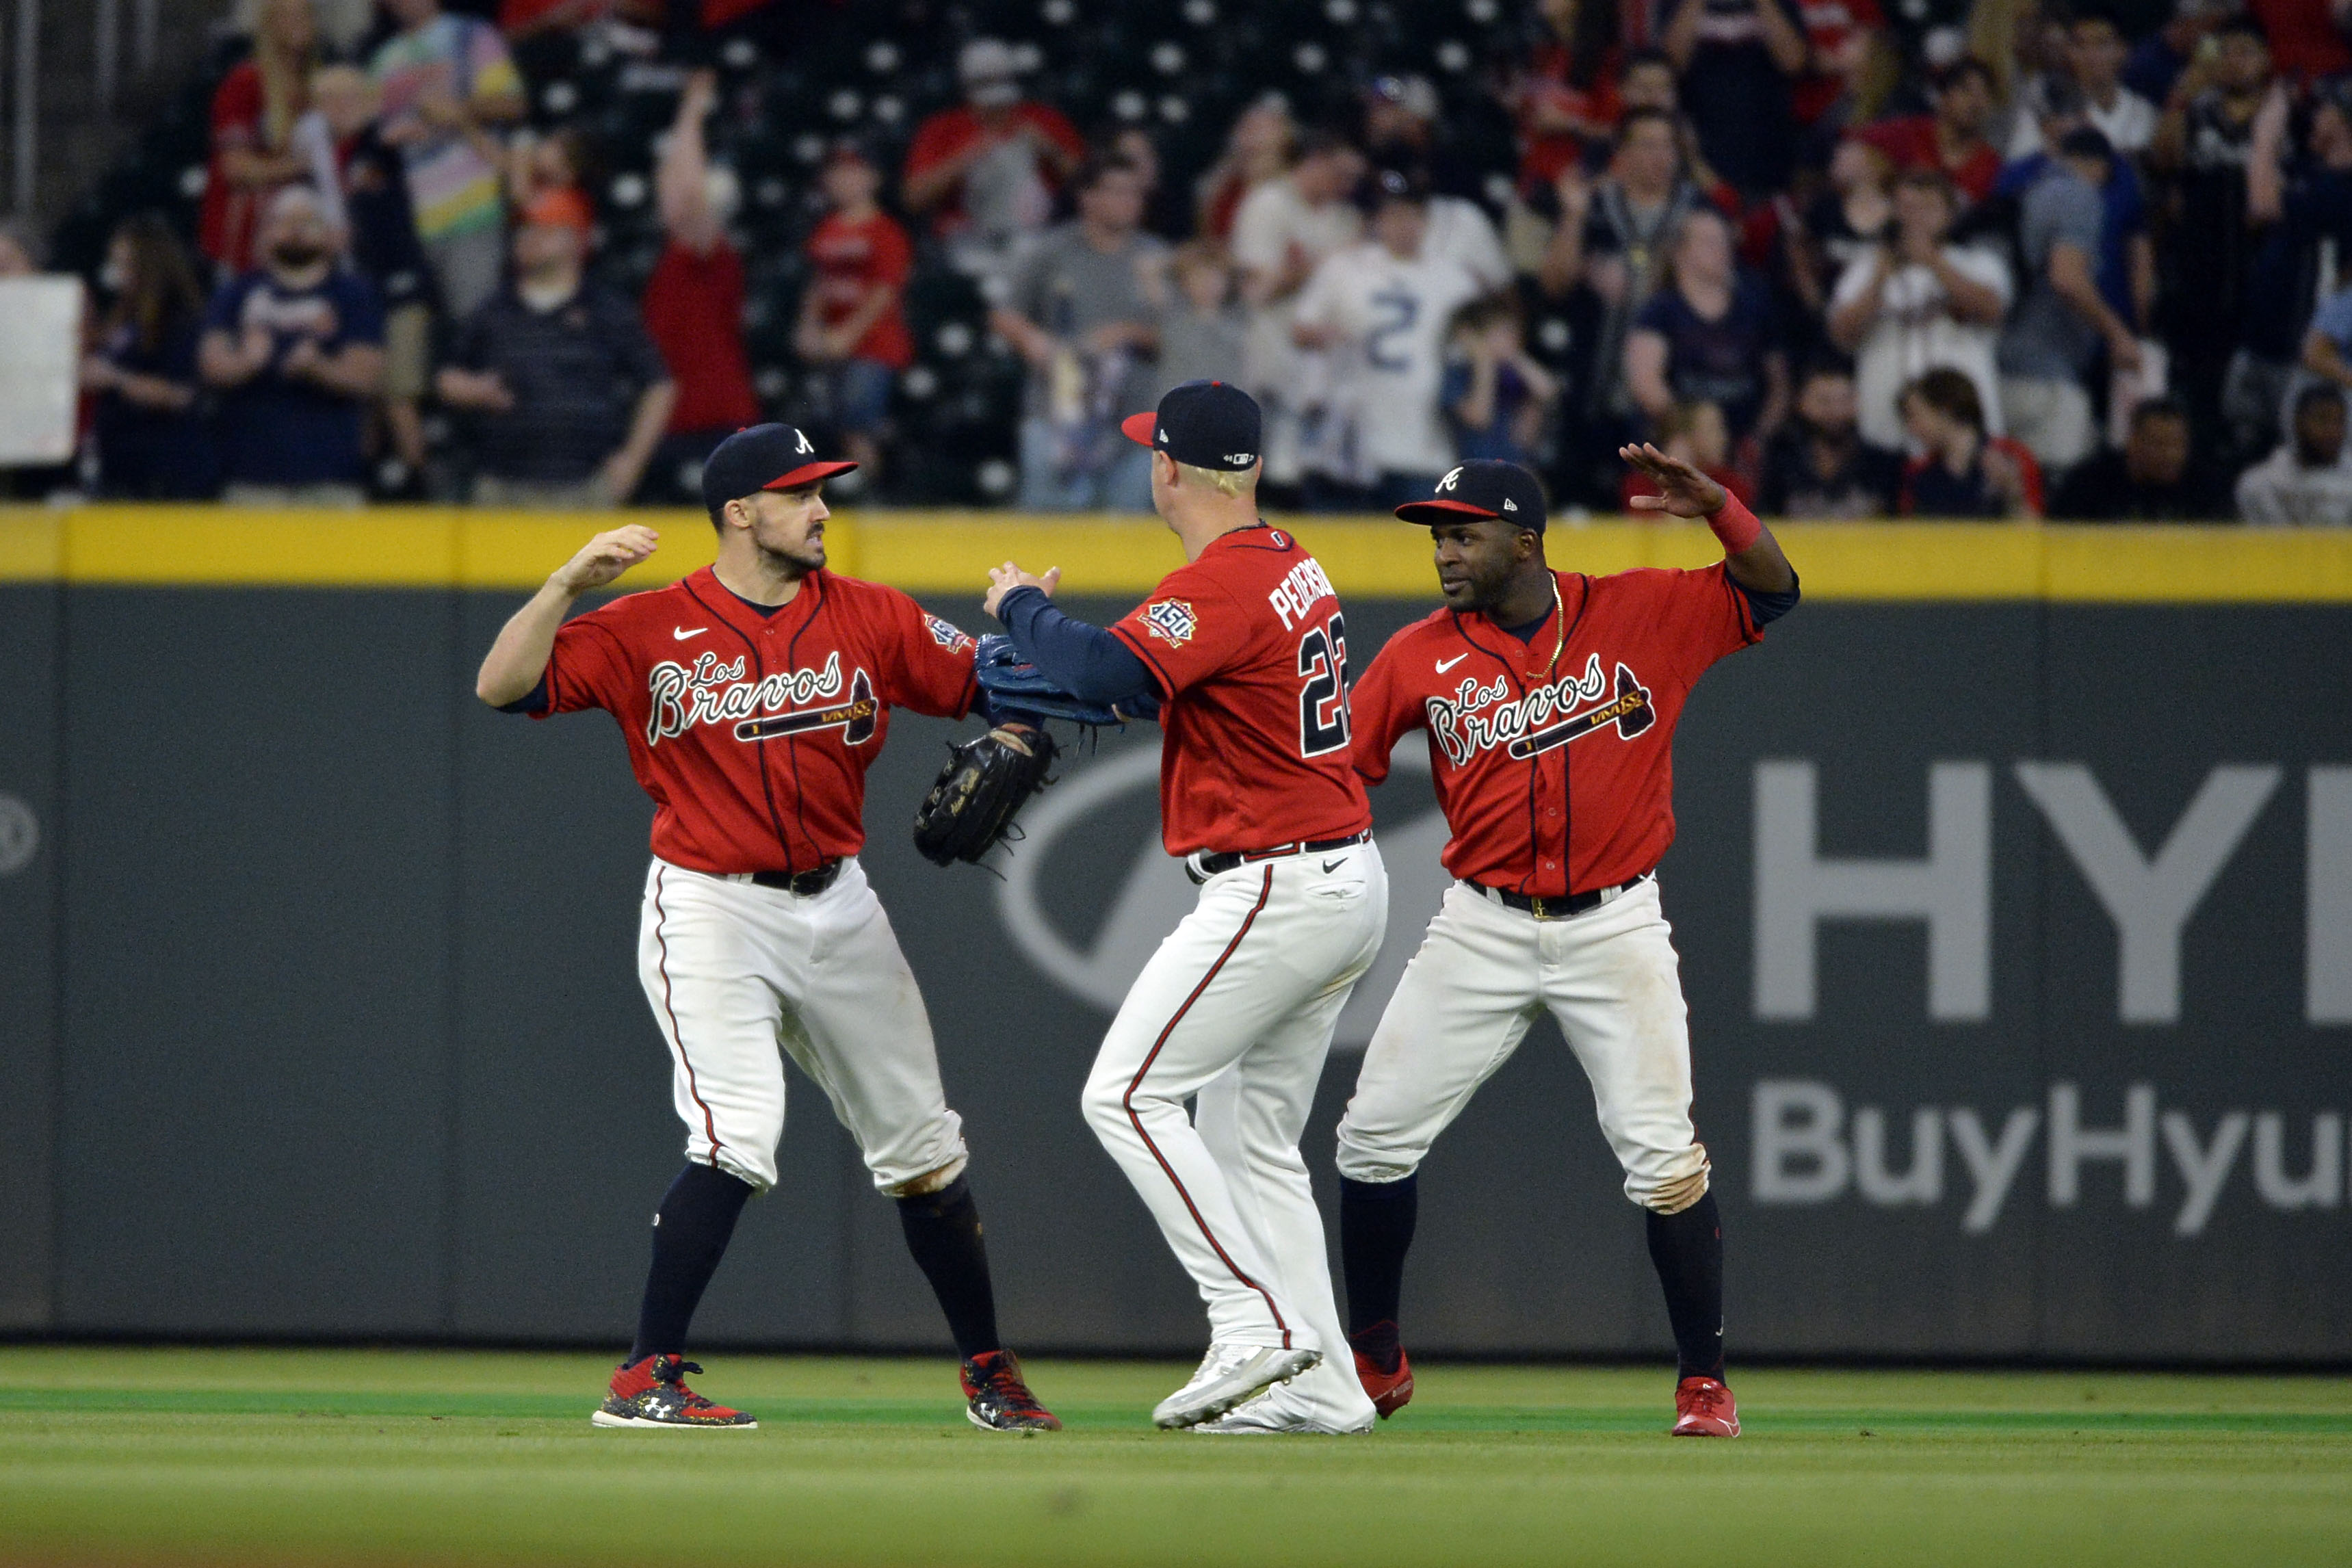 Soler, Anderson power Braves past Marlins 6-2